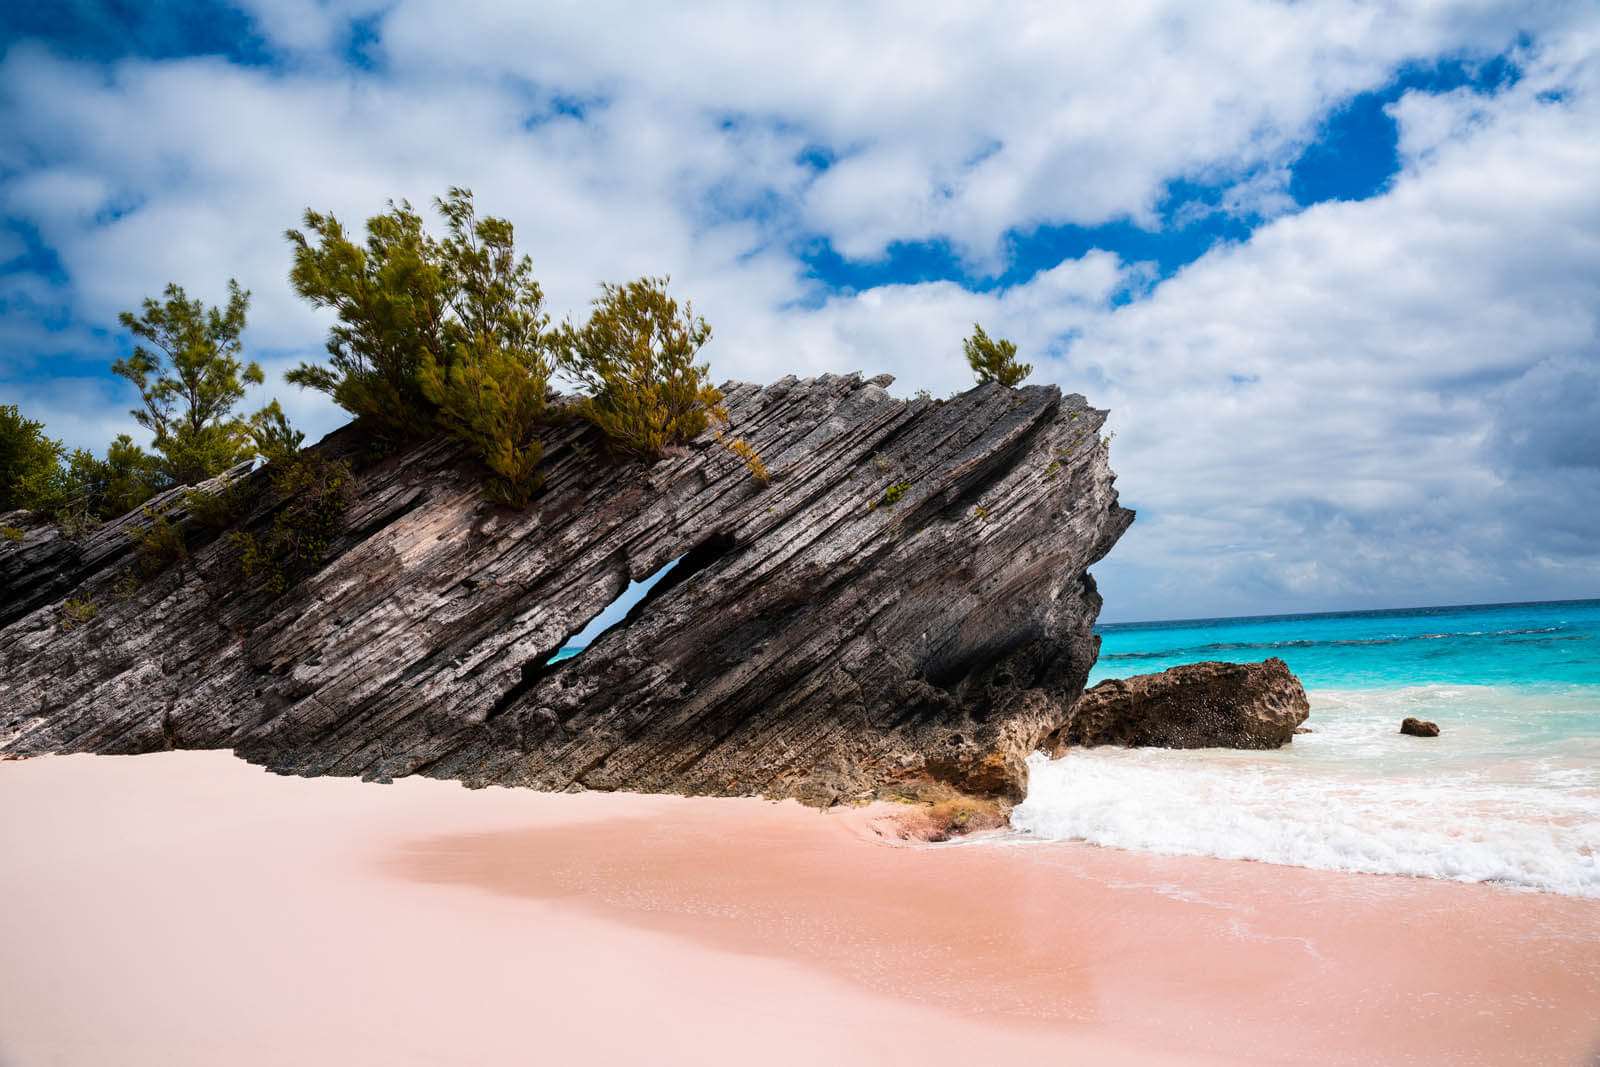 Visiting Bermuda's Horseshoe Bay Beach (Everything You Need to Know!)